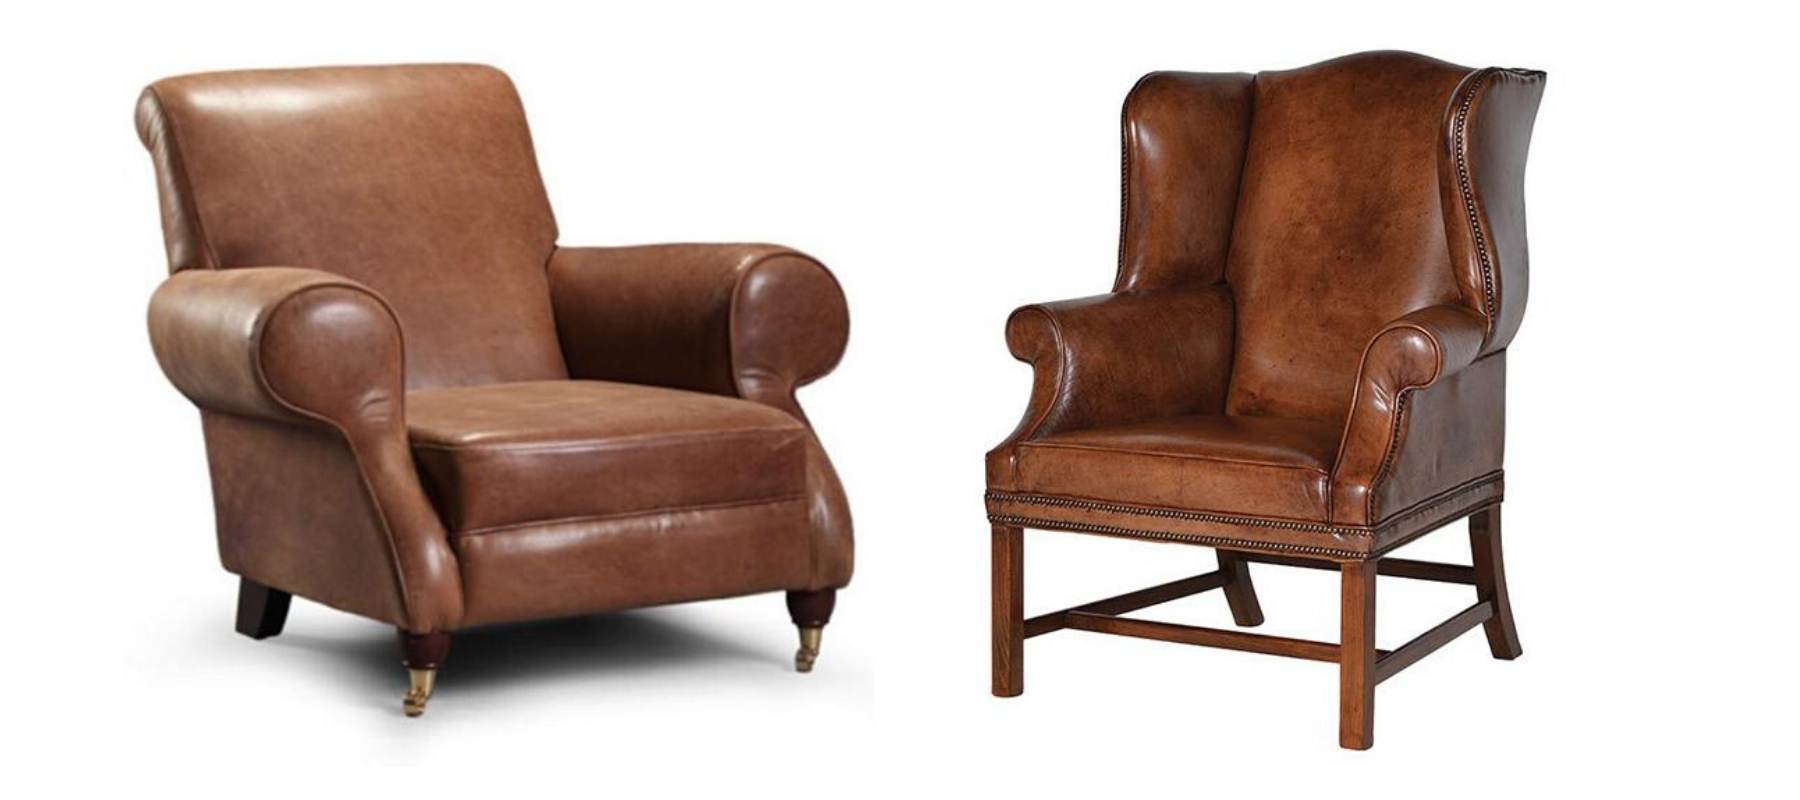 Two brown leather armchairs